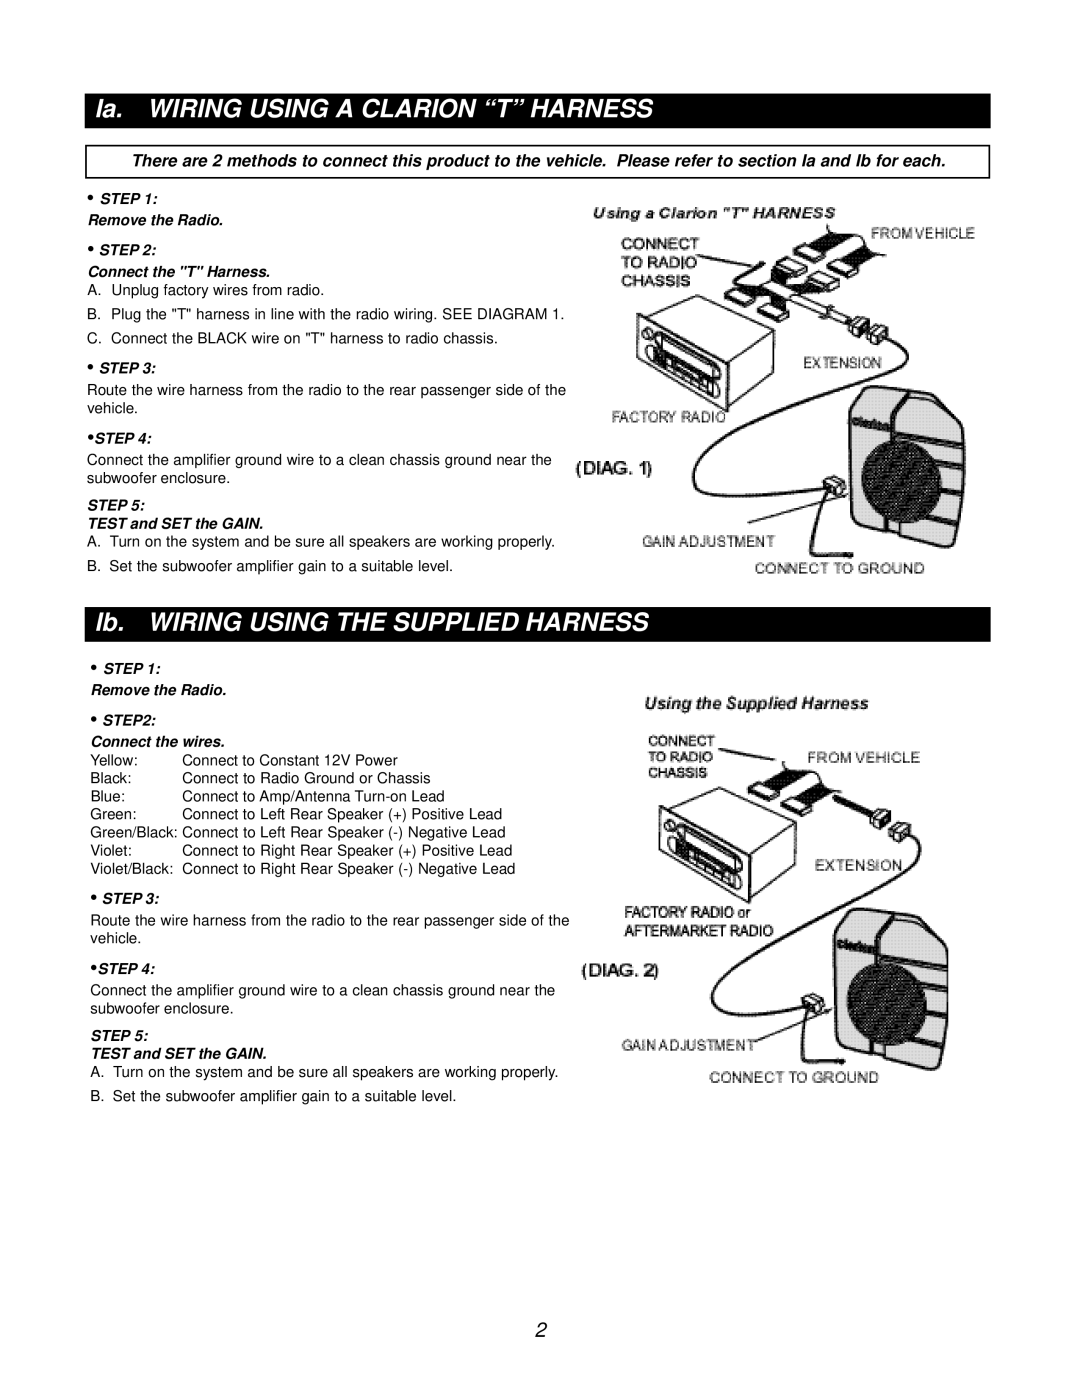 Clarion PSW-D-DGIG manual Ia. WIRING USING A CLARION “T” HARNESS, Ib. WIRING USING THE SUPPLIED HARNESS 